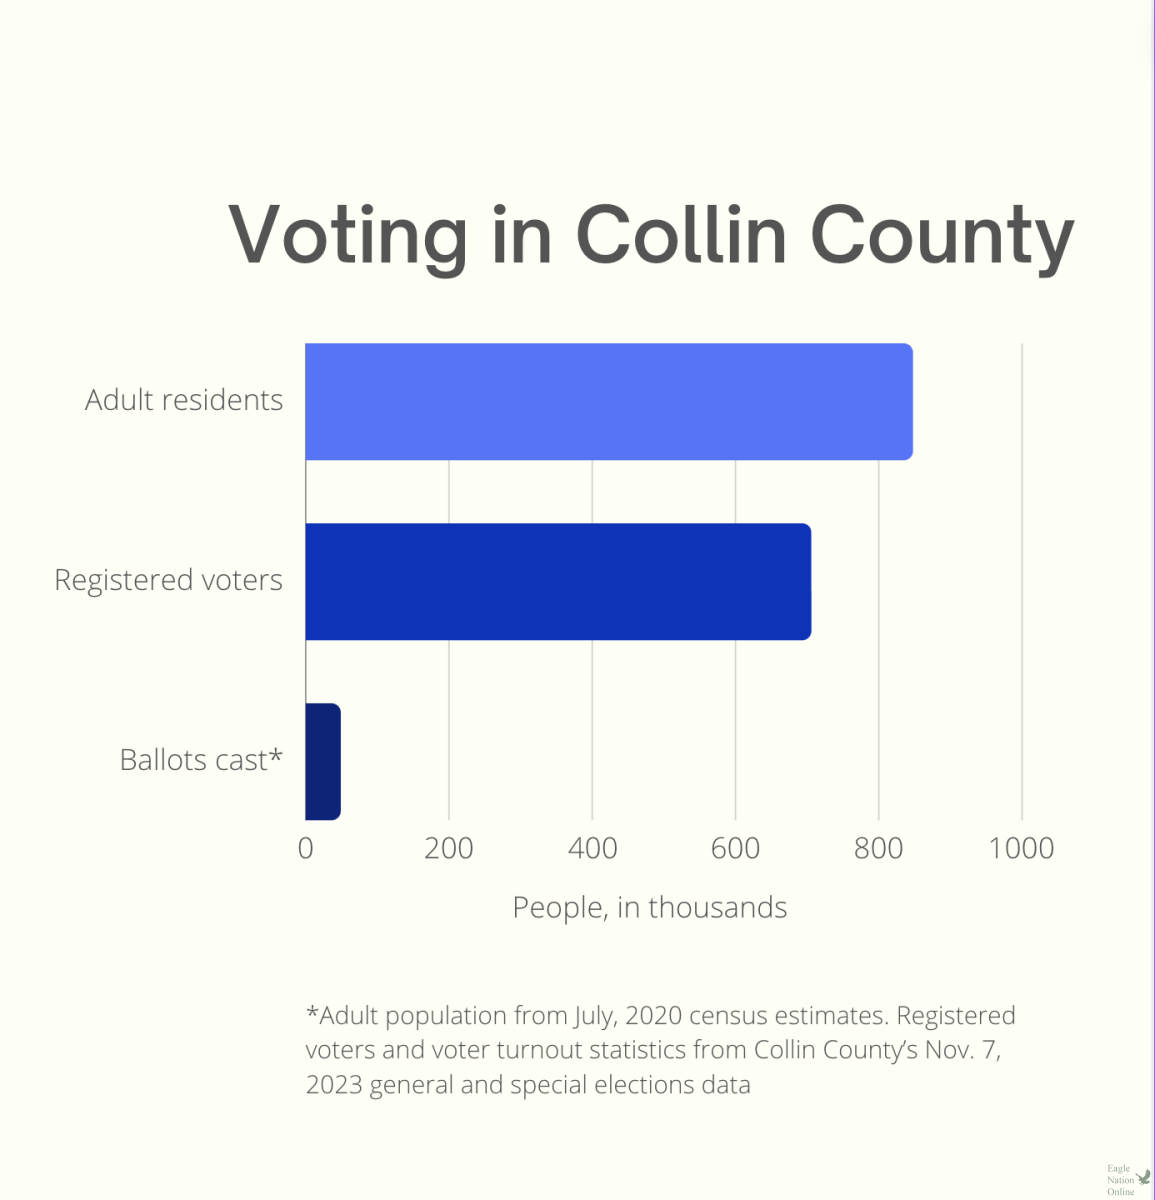 A bar graph, created in canva, shows the adult population of Collin County, estimated from the 2020 census. The registered voters and cast ballot data are from the countys reports on the Nov. 7, 2023 election.